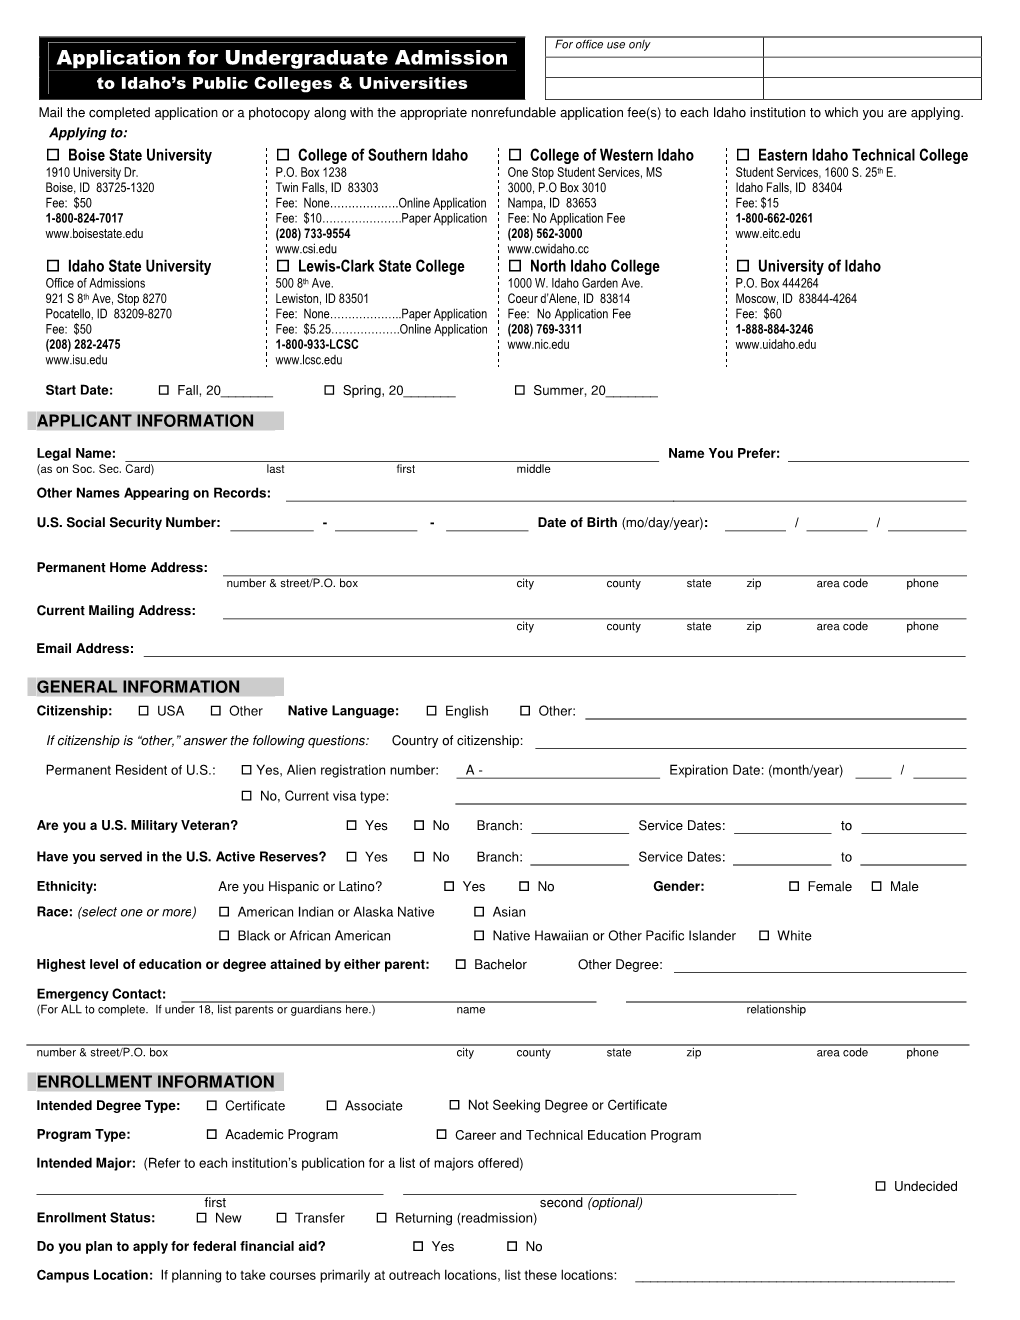 Application for Undergraduate Admission to Idaho’S Public Colleges & Universities